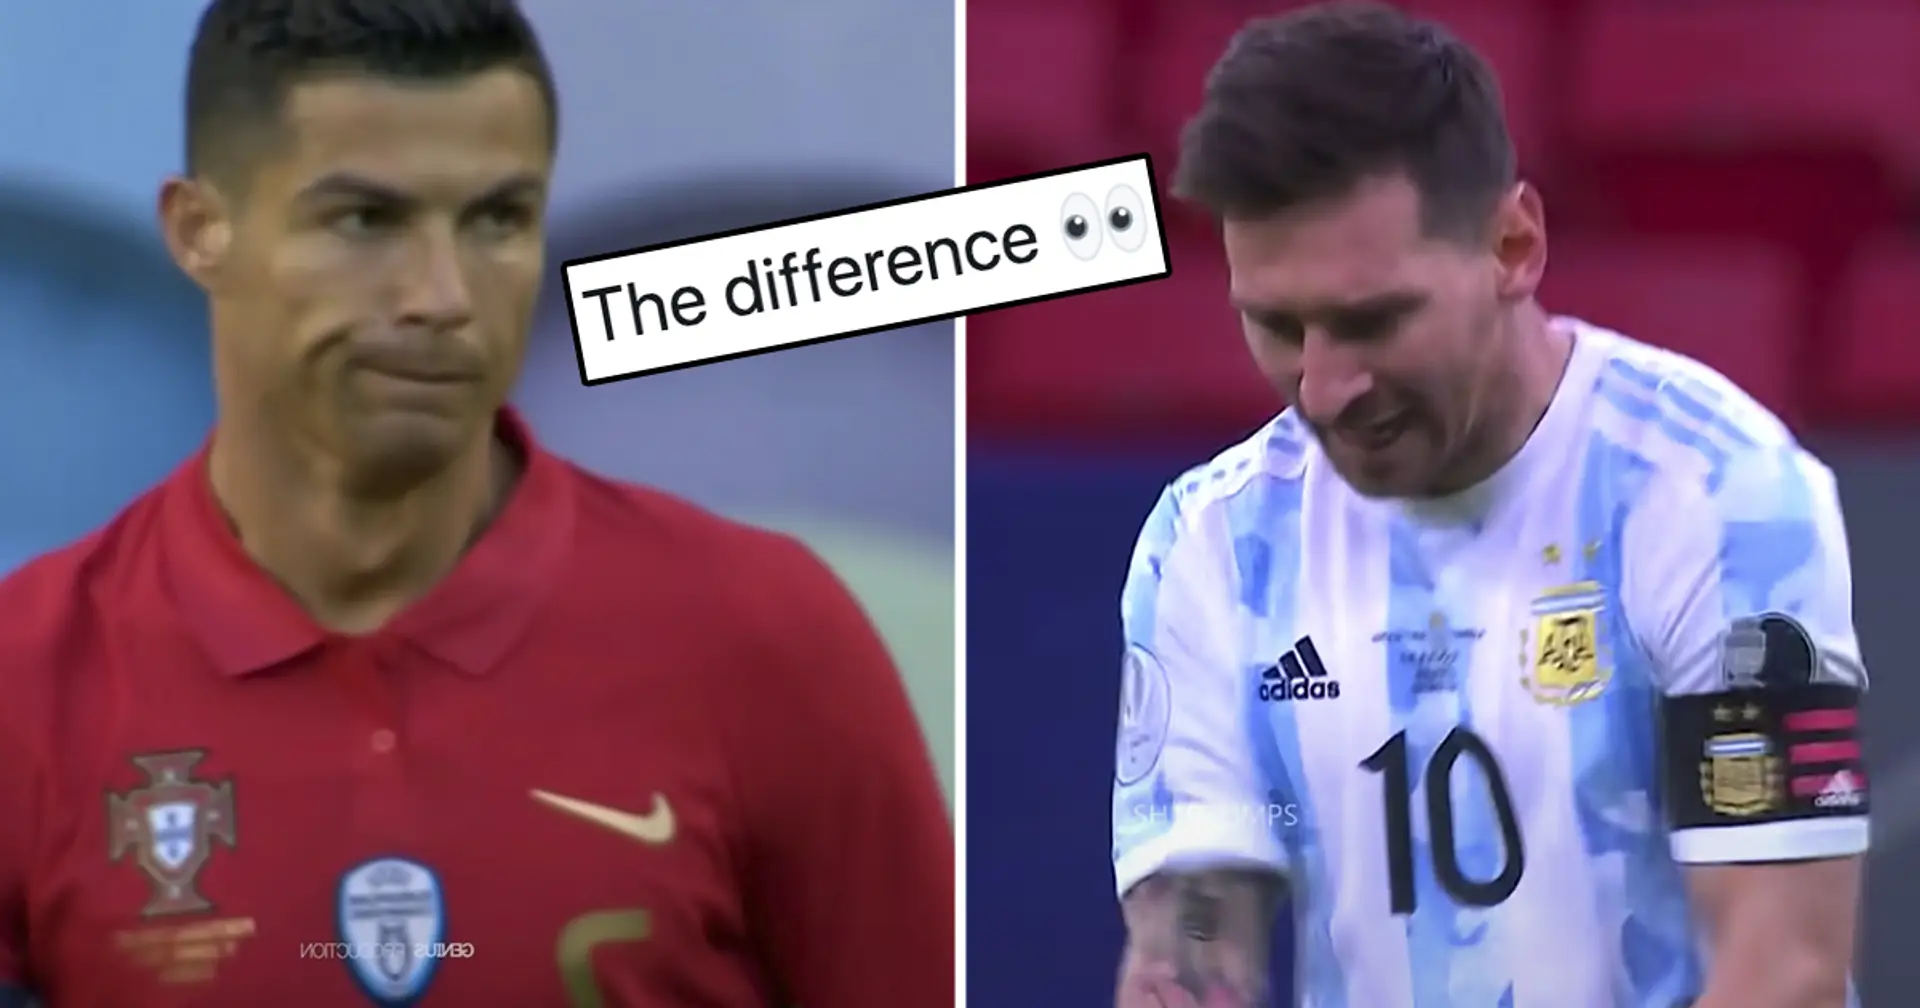 Fan notices 'the difference' between Messi and Ronaldo as captains in 2021